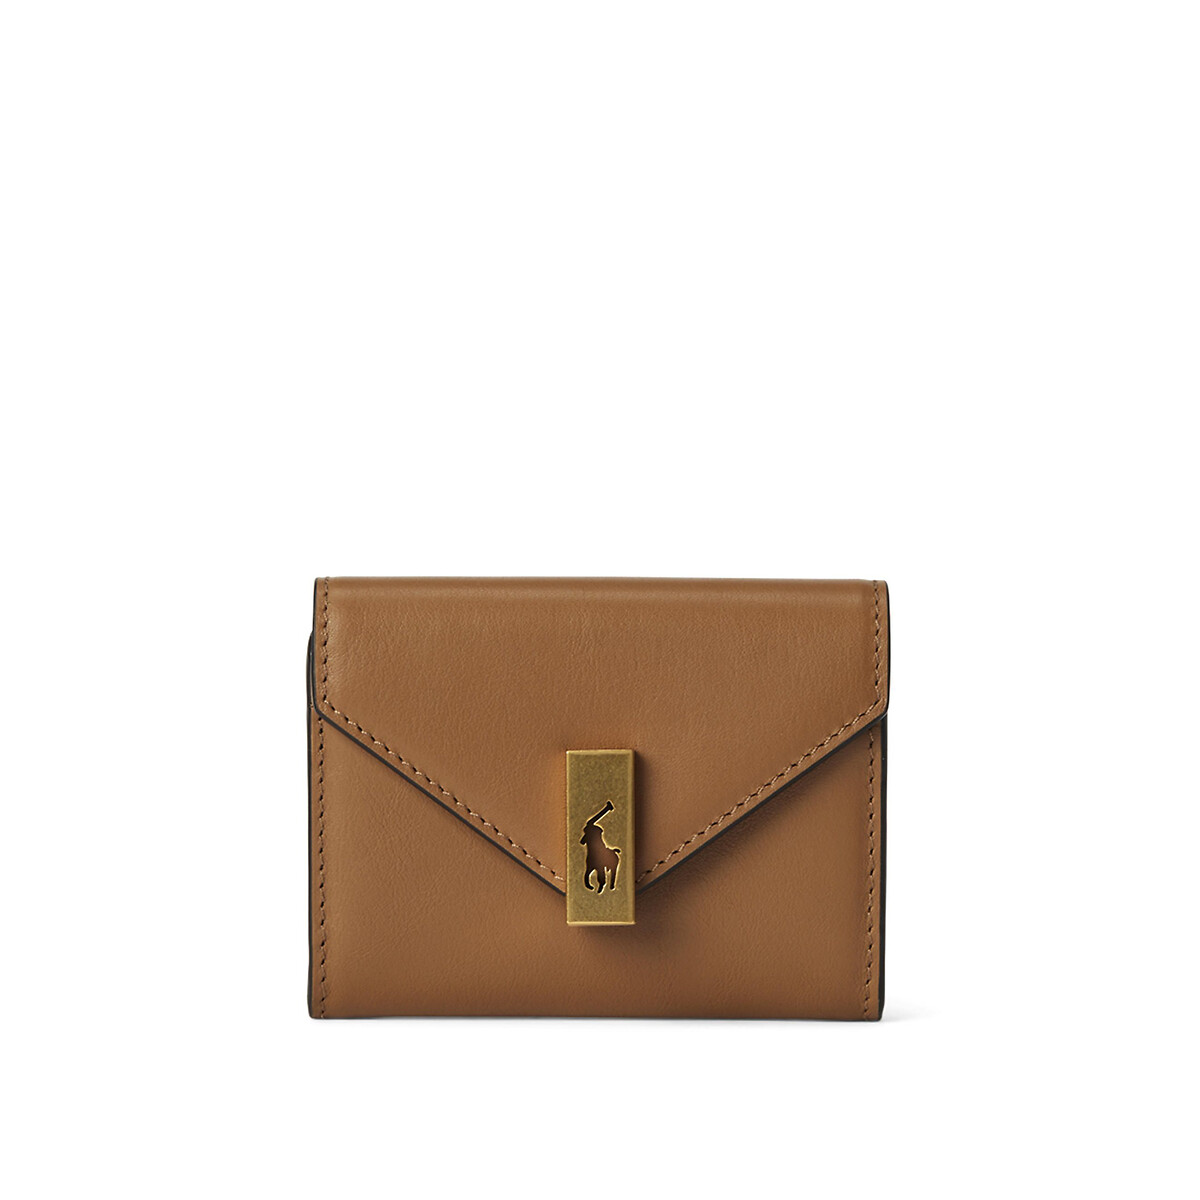 Smooth leather card holder with envelope flap , camel, Polo Ralph Lauren |  La Redoute